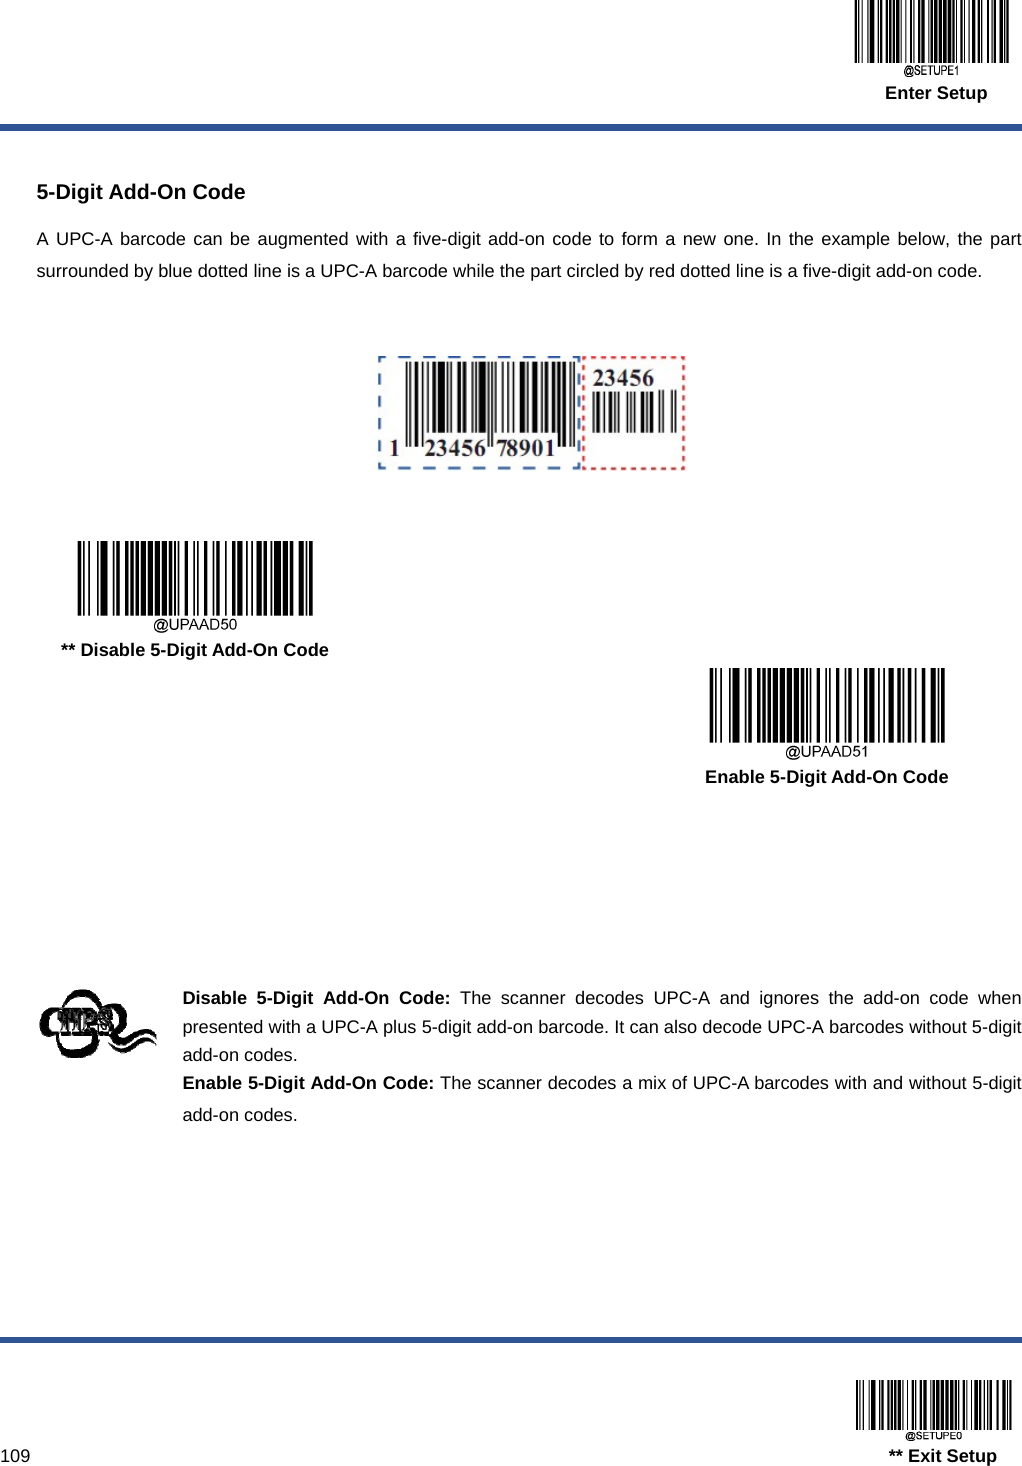  Enter Setup  109                                                                                   ** Exit Setup  5-Digit Add-On Code A UPC-A barcode can be augmented with a five-digit add-on code to form a new one. In the example below, the part surrounded by blue dotted line is a UPC-A barcode while the part circled by red dotted line is a five-digit add-on code.        ** Disable 5-Digit Add-On Code      Enable 5-Digit Add-On Code     Disable 5-Digit Add-On Code: The scanner decodes UPC-A and ignores the add-on code when presented with a UPC-A plus 5-digit add-on barcode. It can also decode UPC-A barcodes without 5-digit add-on codes. Enable 5-Digit Add-On Code: The scanner decodes a mix of UPC-A barcodes with and without 5-digit add-on codes.